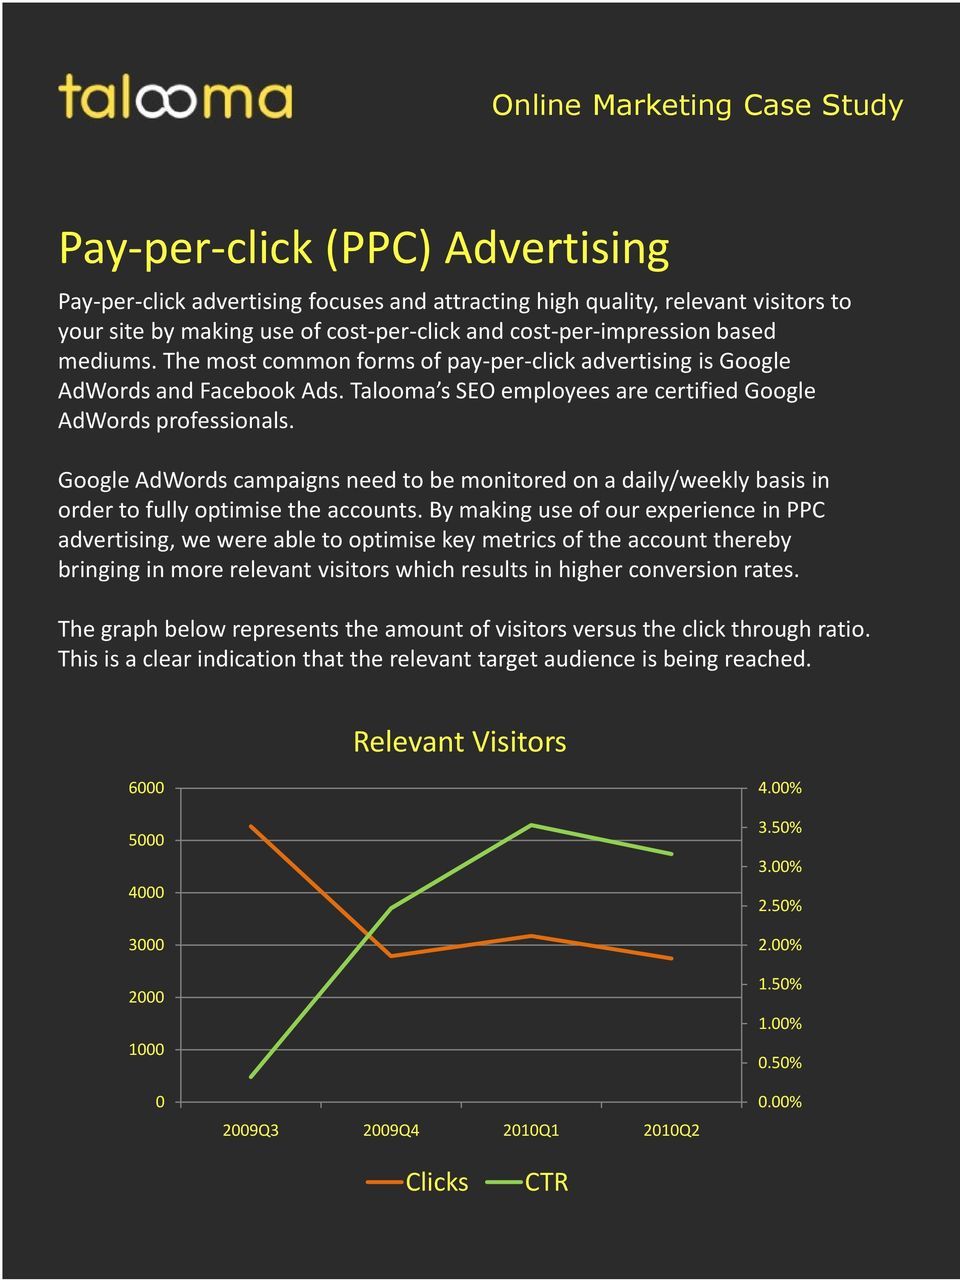 Google AdWords campaigns need to be monitored on a daily/weekly basis in order to fully optimise the accounts.